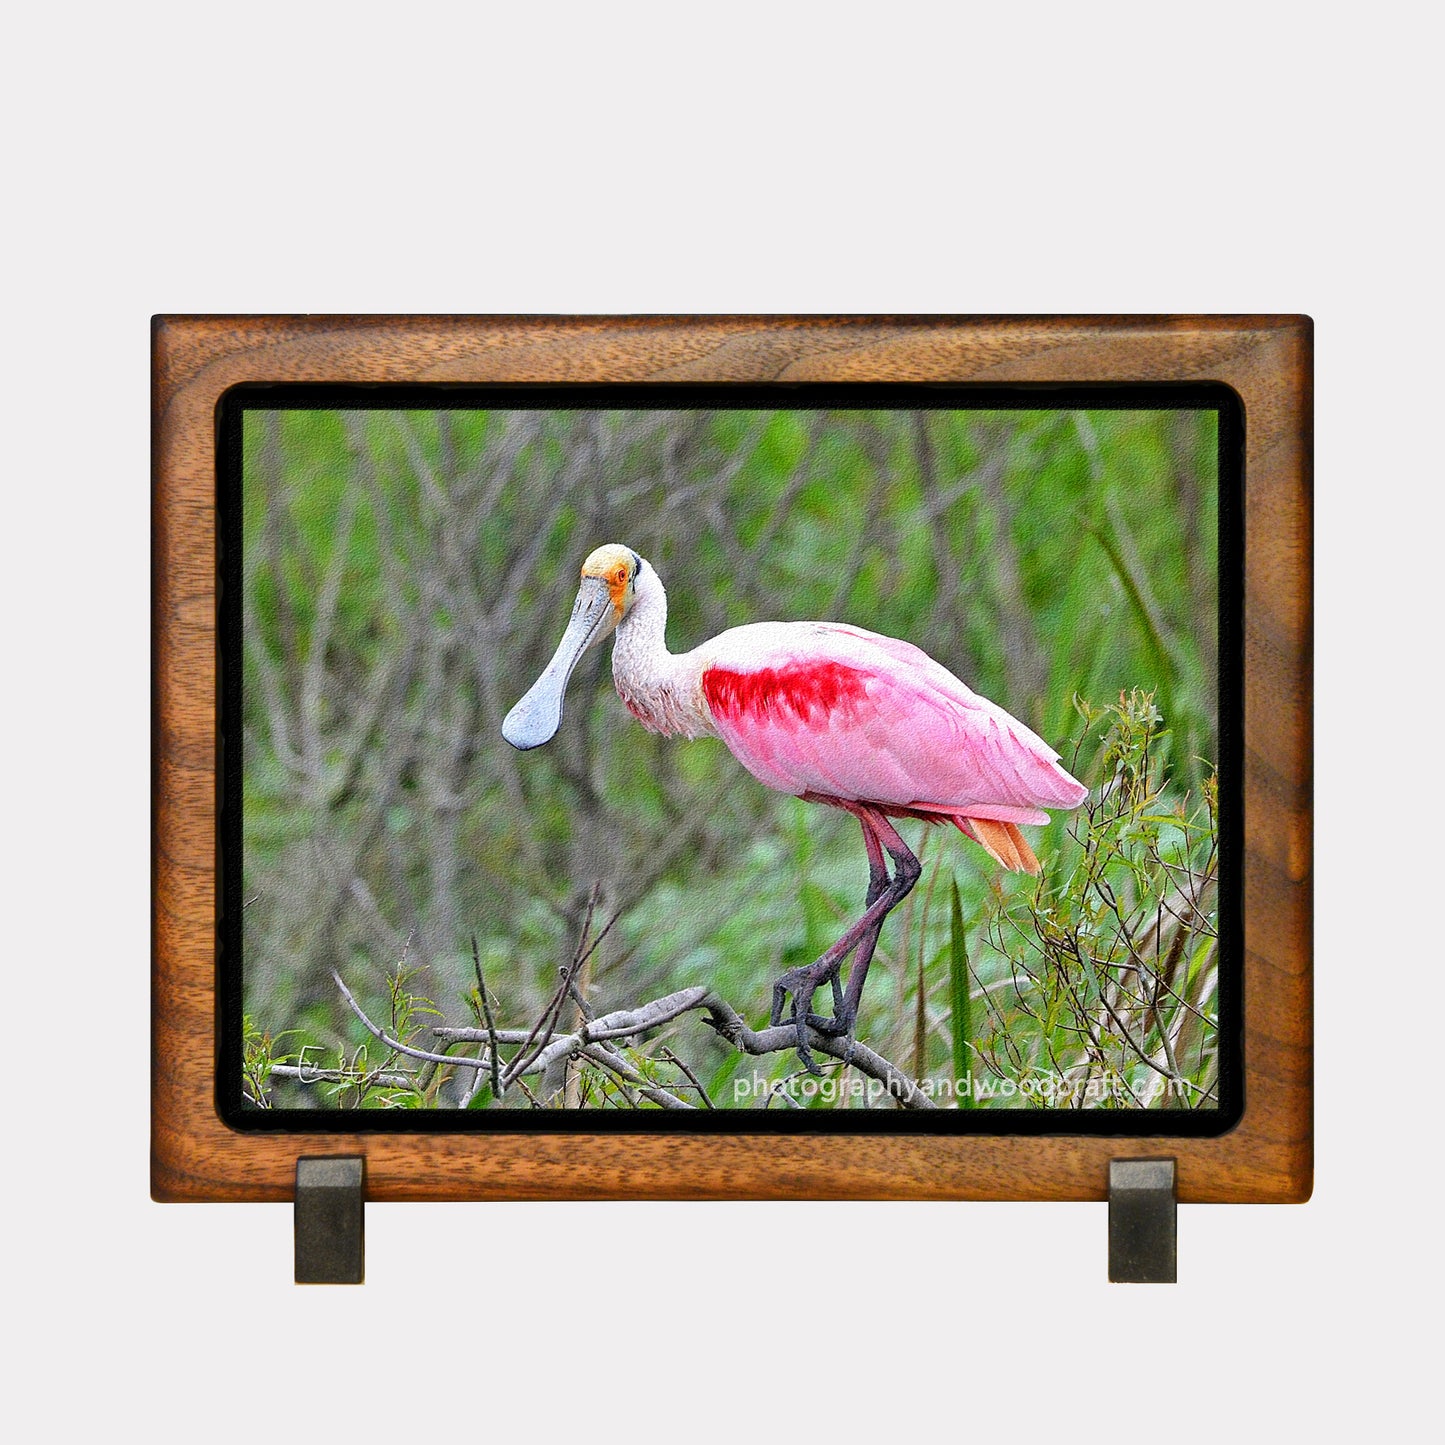 5" x 7" Roseate Spoonbill. Canvas Print in Solid Wood Floating Frame